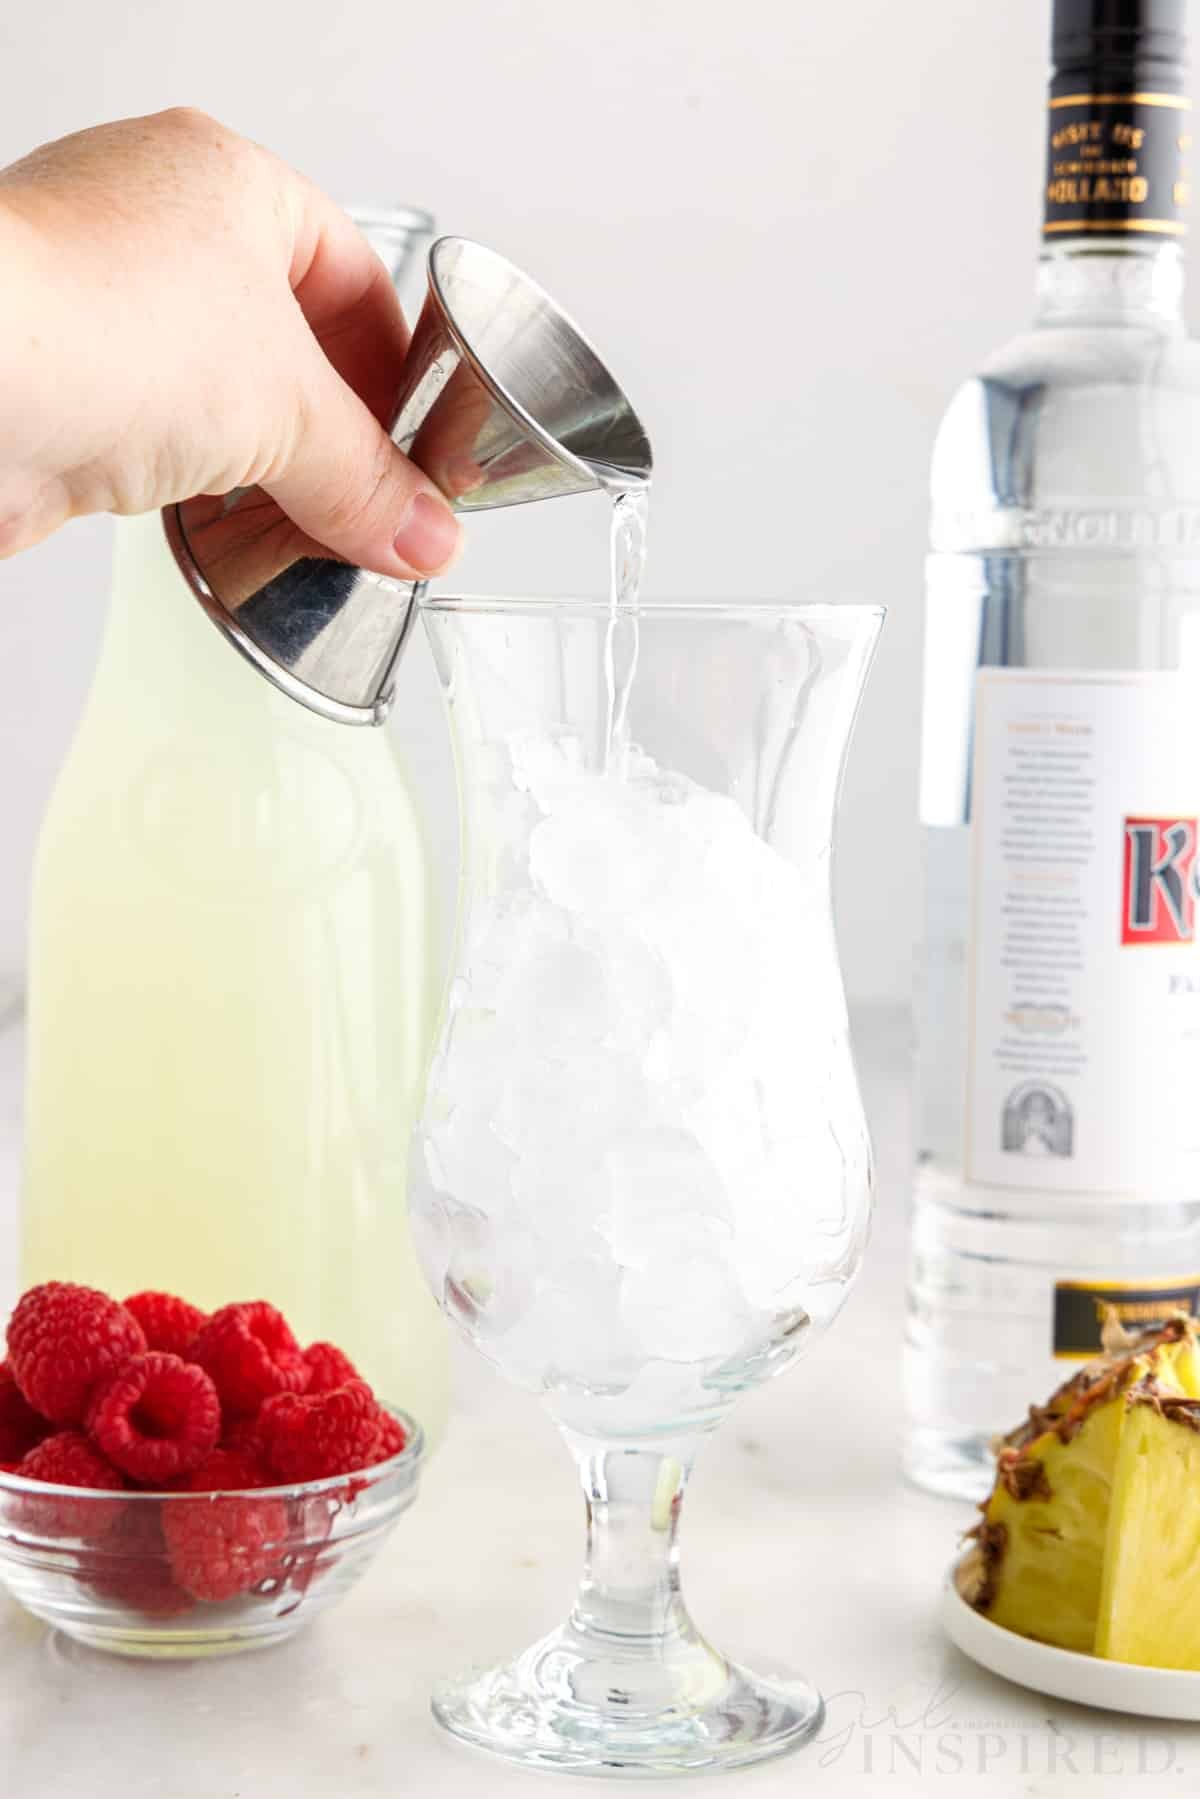 Tall glass filled with ice cubes, hand pouring vodka over the ice, bowl of fresh raspberries, plate of cut pineapple, bottle of vodka, jug of lemonade, on a marble countertop.